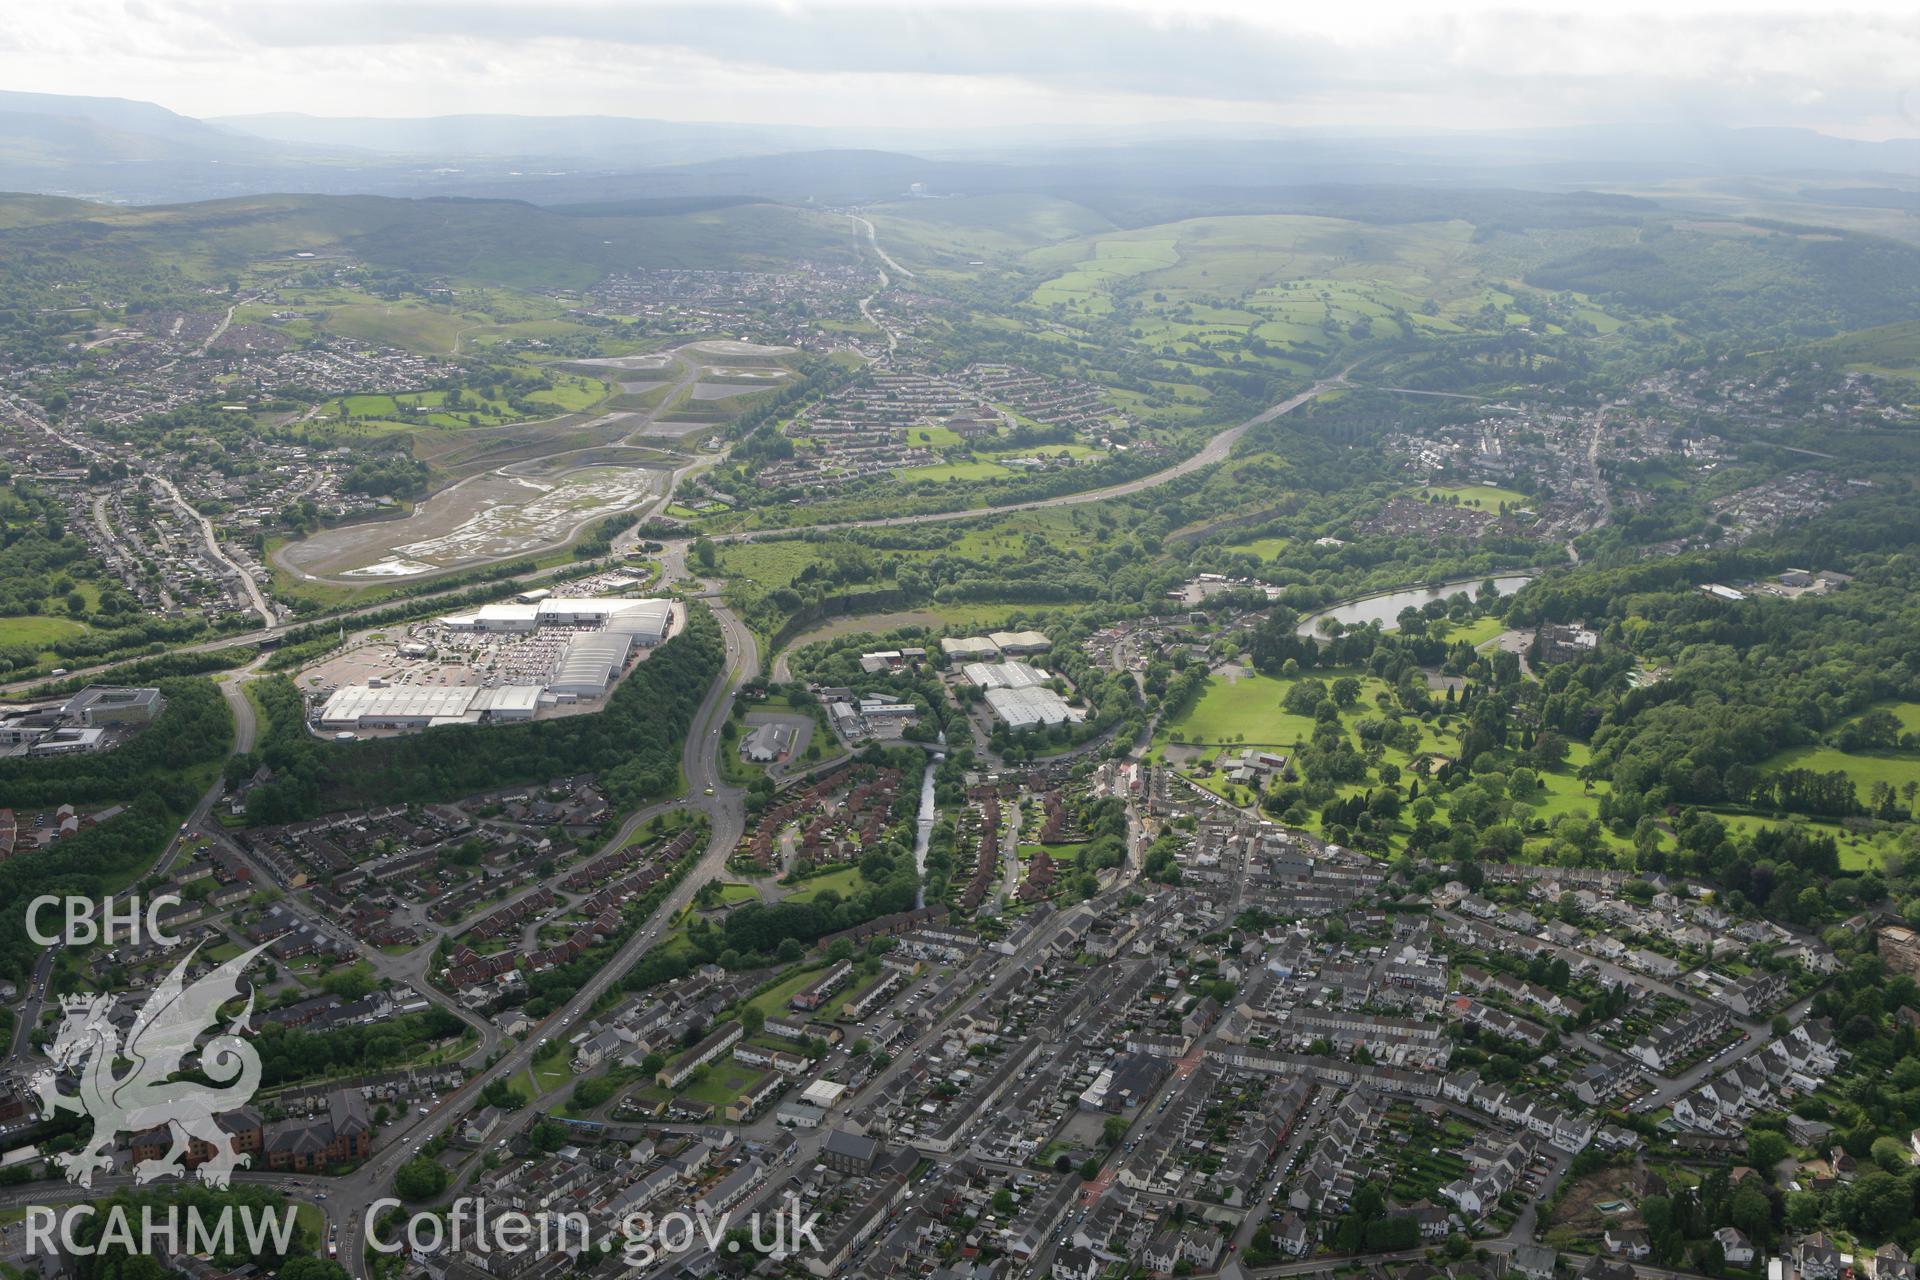 RCAHMW colour oblique photograph of Merthyr Tydfil. Taken by Toby Driver on 13/06/2011.